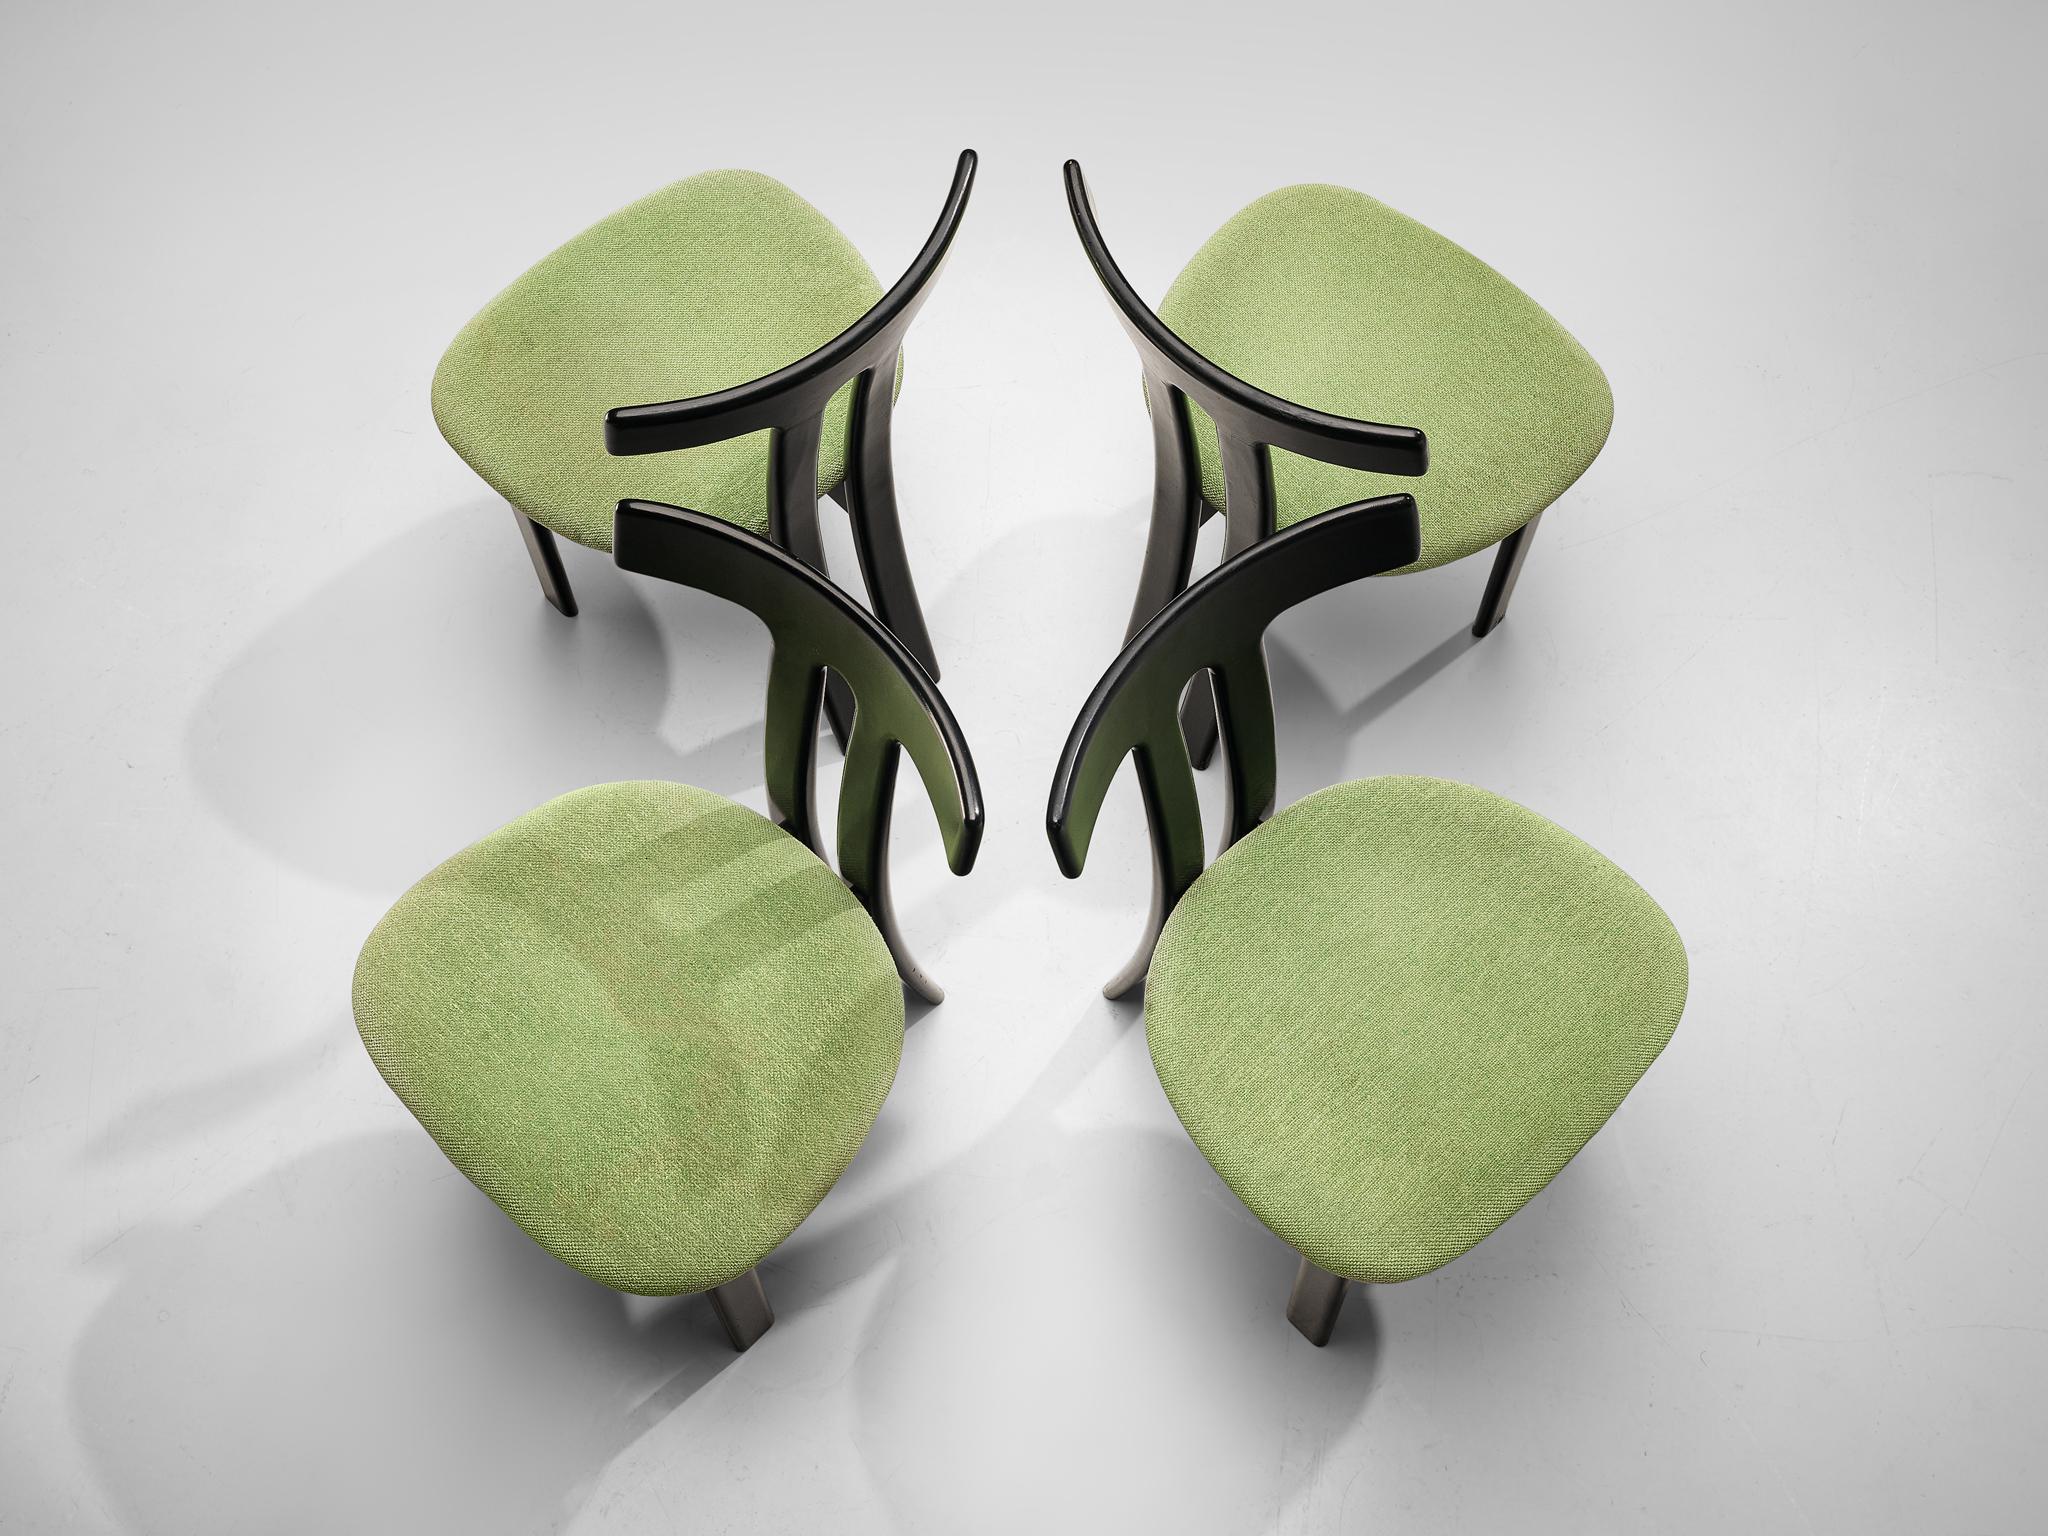 Set of 4 Danish Dining Chairs in Black Lacquered Frames and Green Seats 1